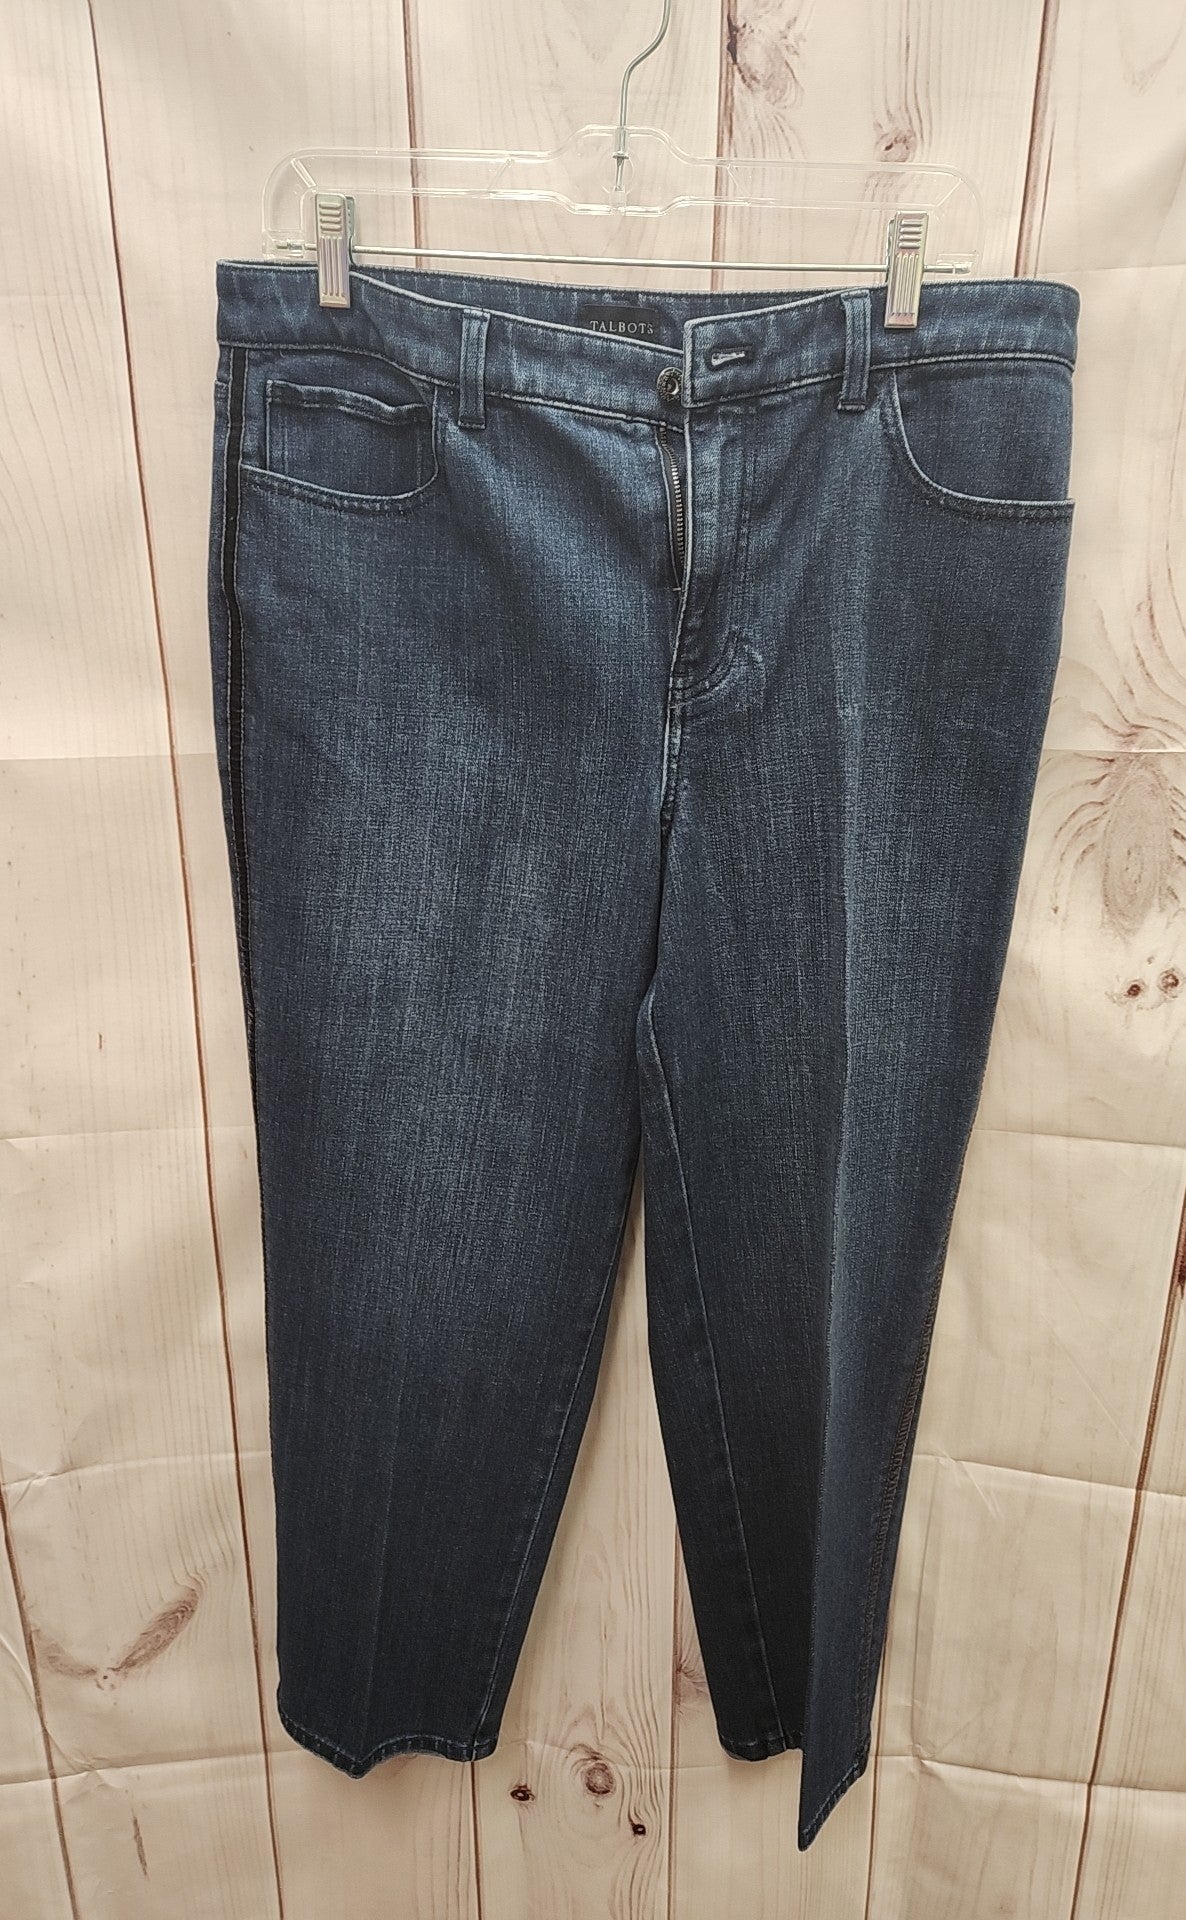 Talbots Women's Size 12 Petite High Waisted Straight Ankle Jean Blue Jeans